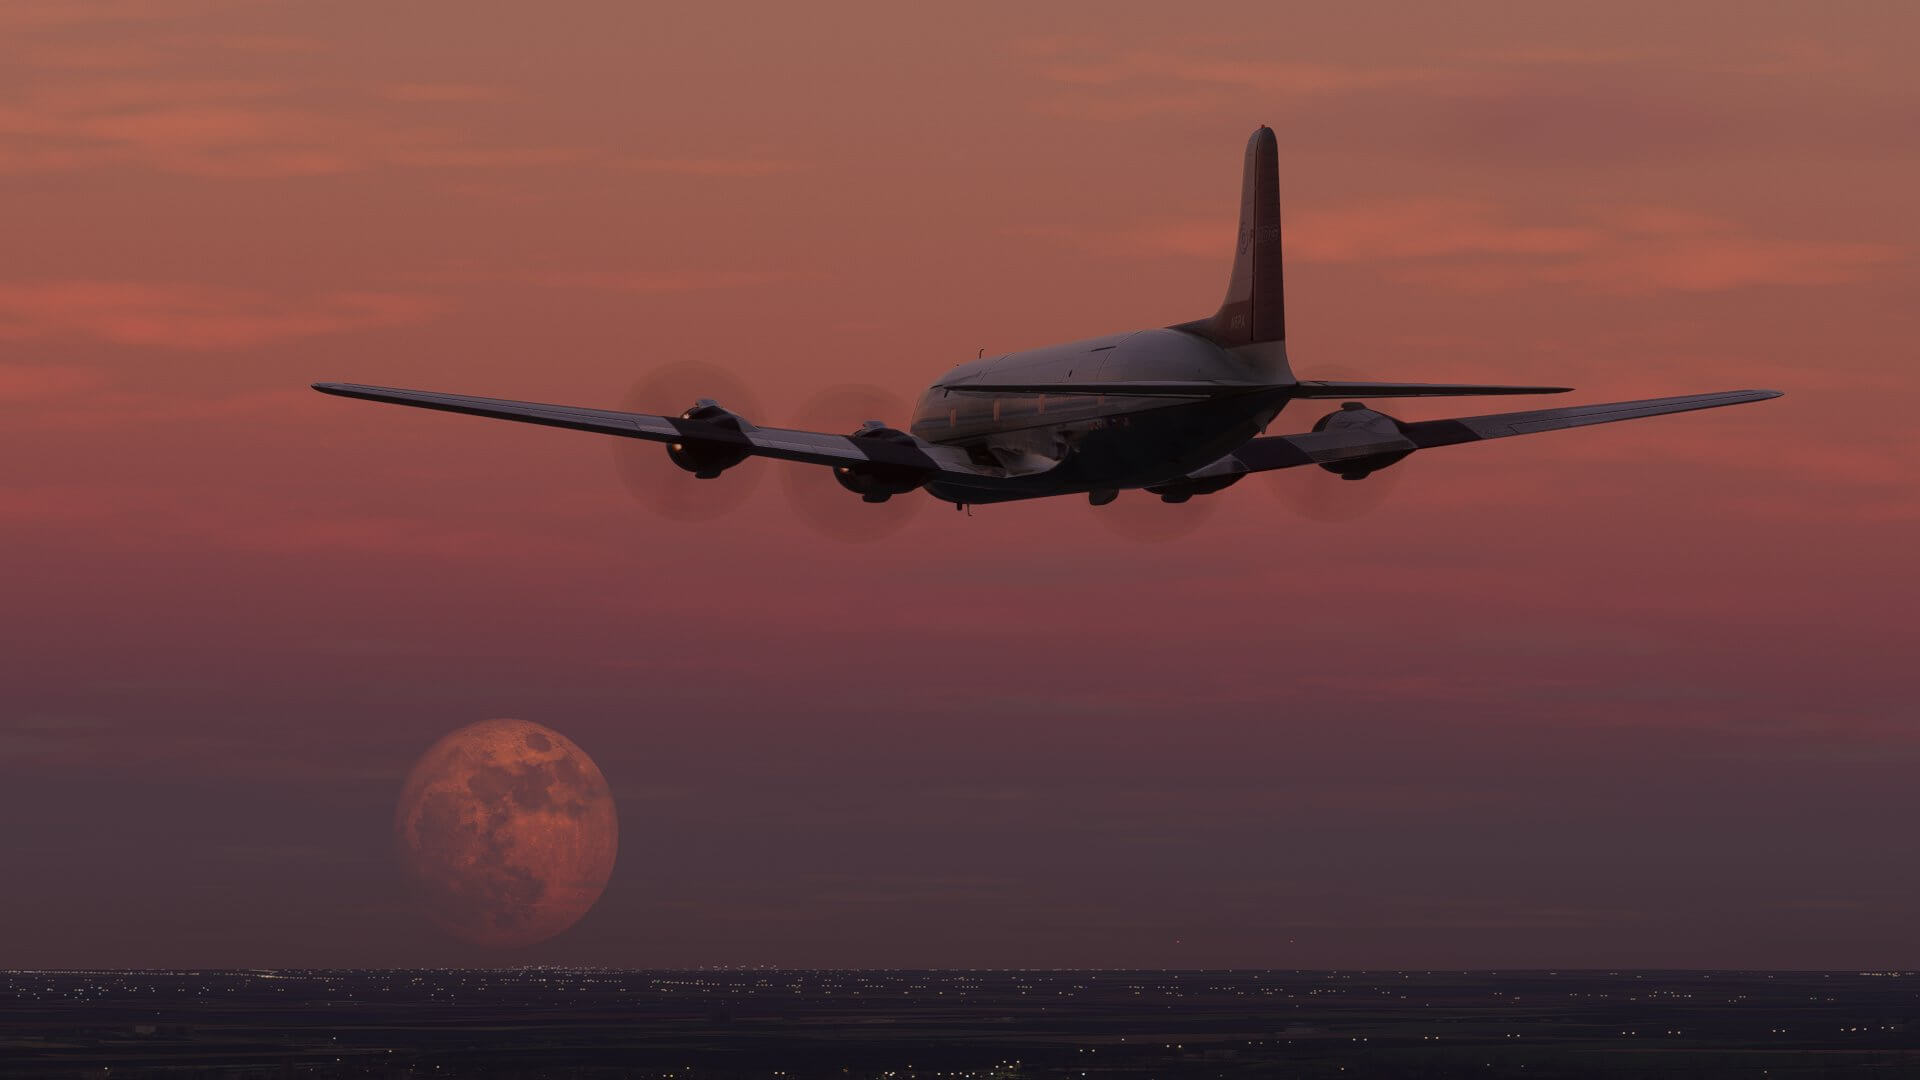 An airliner comes in for landing as the moon rises in the sky.